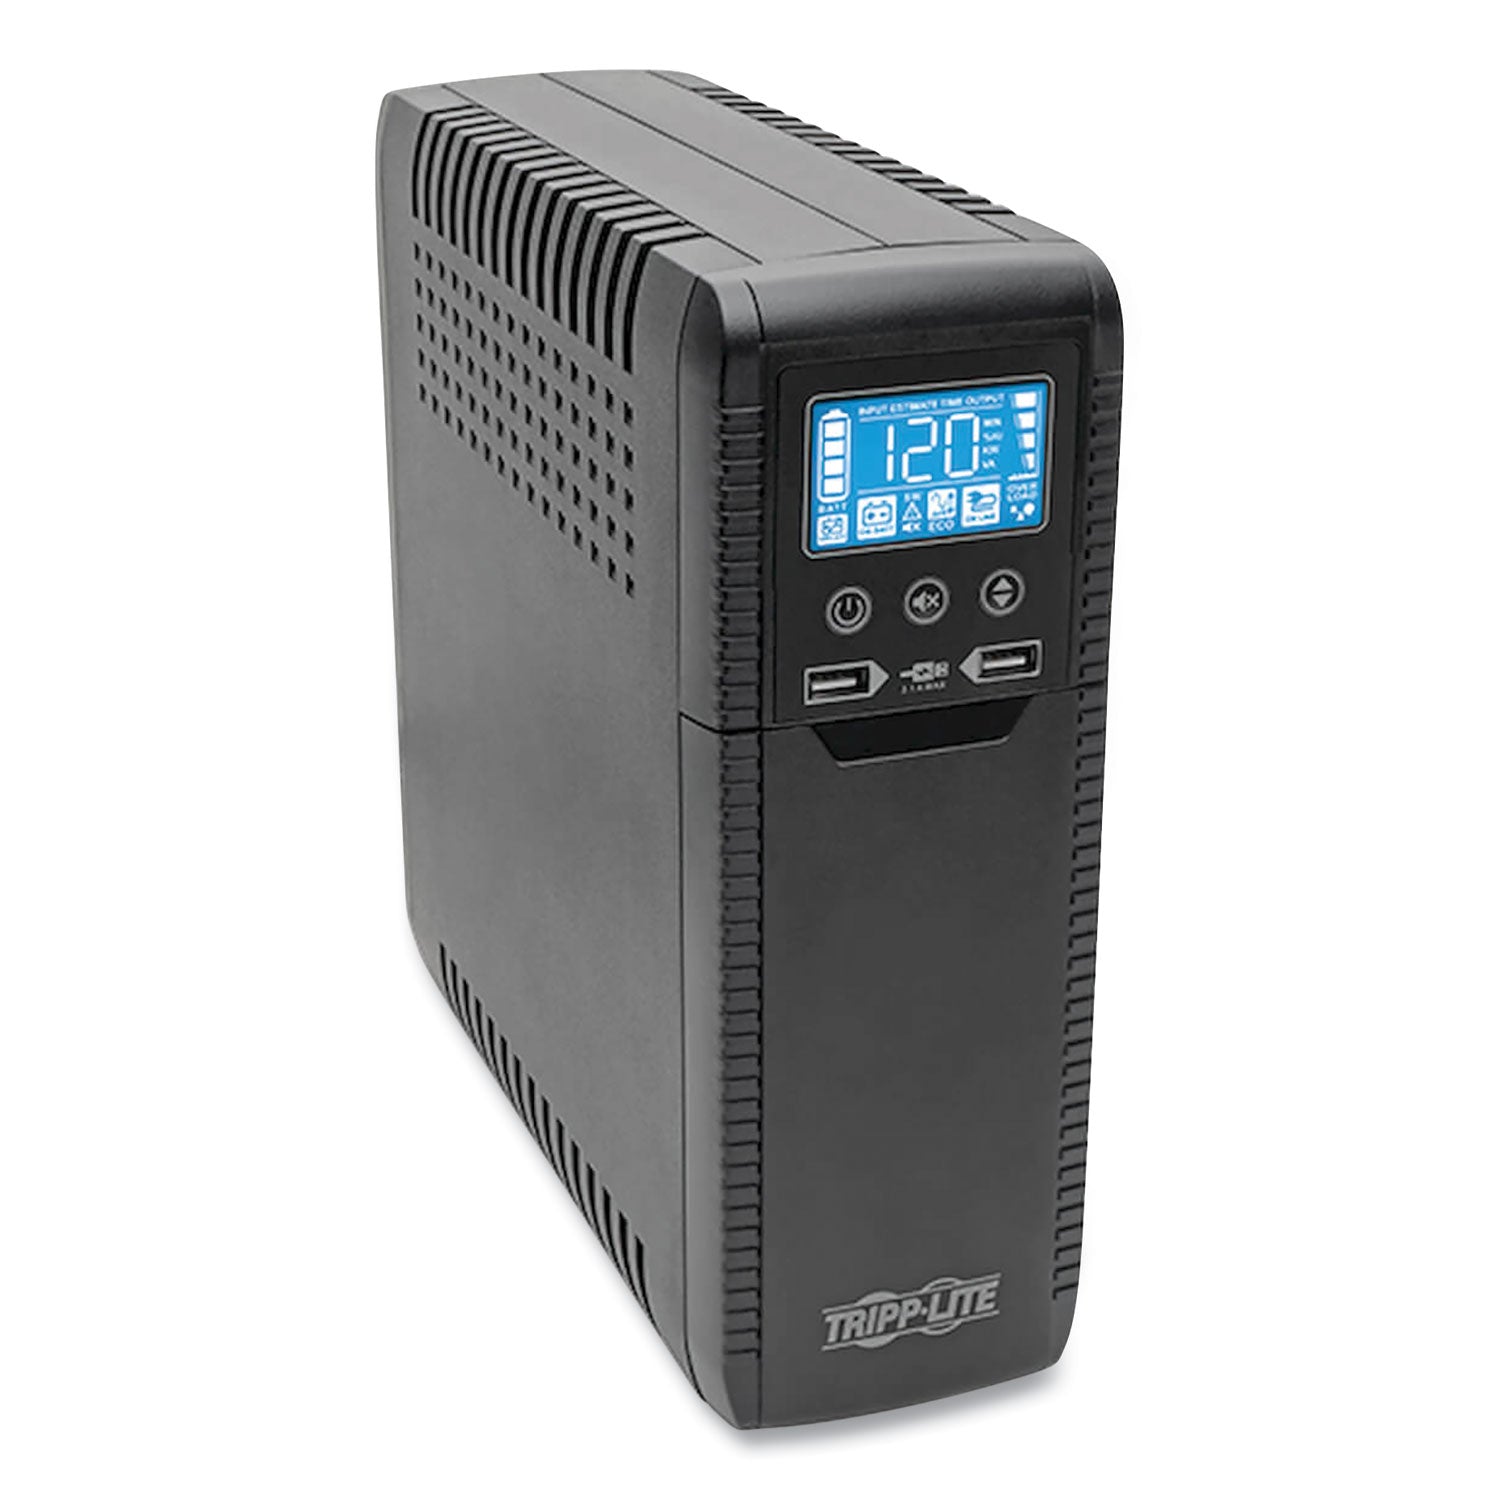 eco-series-desktop-ups-systems-with-usb-monitoring-8-outlets-1000-va-316-j_trpeco1000lcd - 1